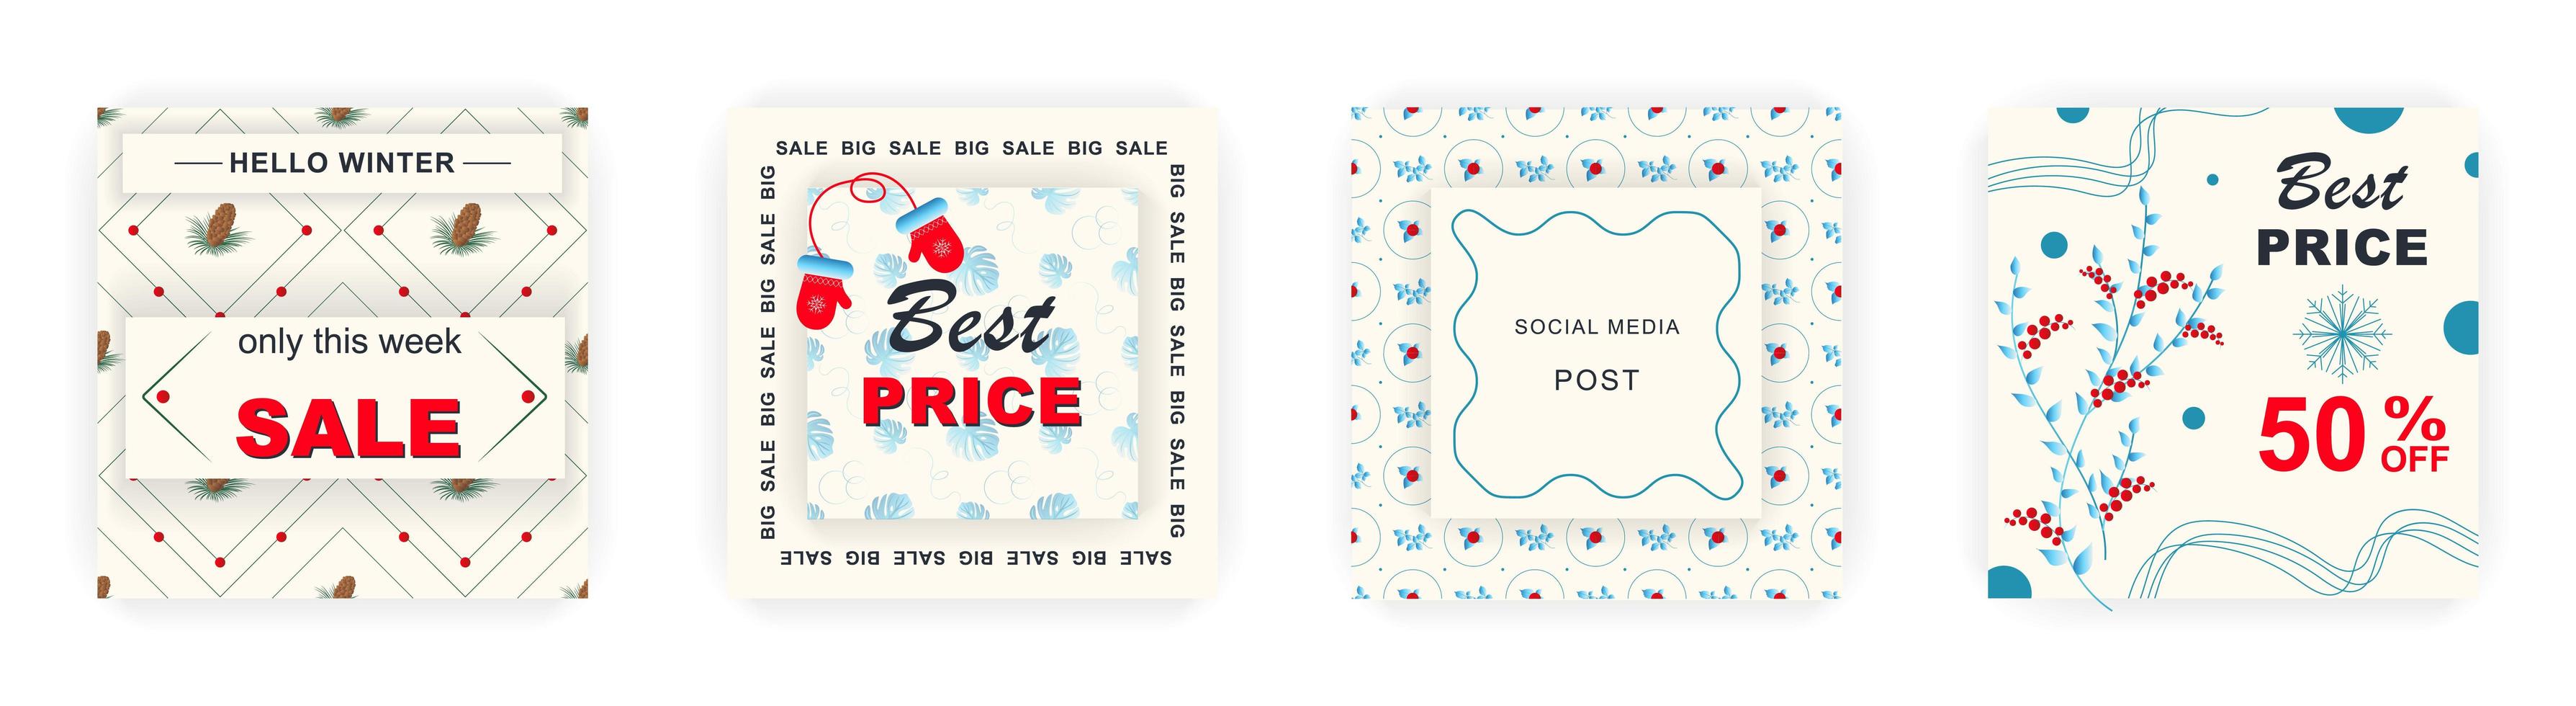 Modern winter square sale poster for Merry Christmas templates. Suitable for social media posts, poster, mobile apps, banners design and web ads, vector backgrounds, promotion materials.